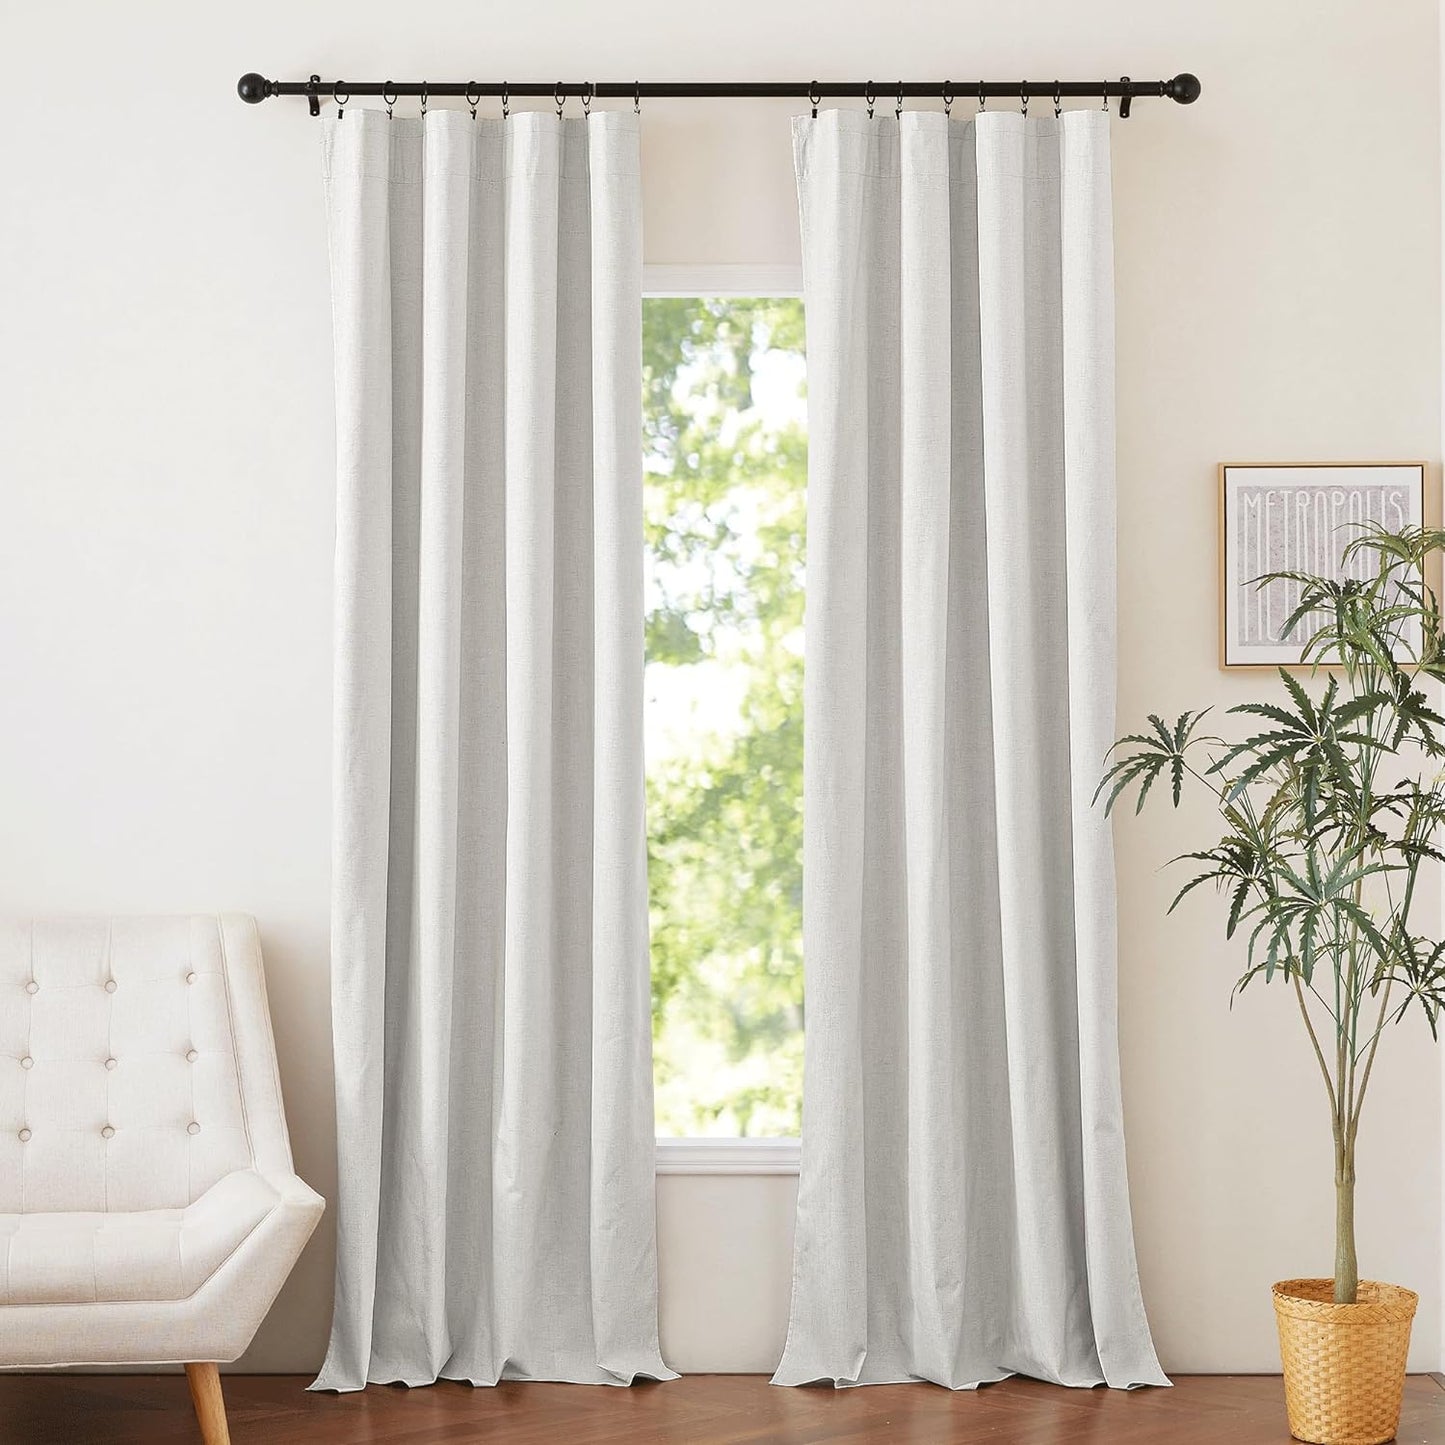 NICETOWN 100% Blackout Natural Linen Bedroom Curtains 52" Width by 95" Length 2 Panels with Thermal Insulated Liners, Farmhouse Style Keep Warm Dual Rod Pocket Window Draperies for Living Room  NICETOWN Ivory W52 X L90 